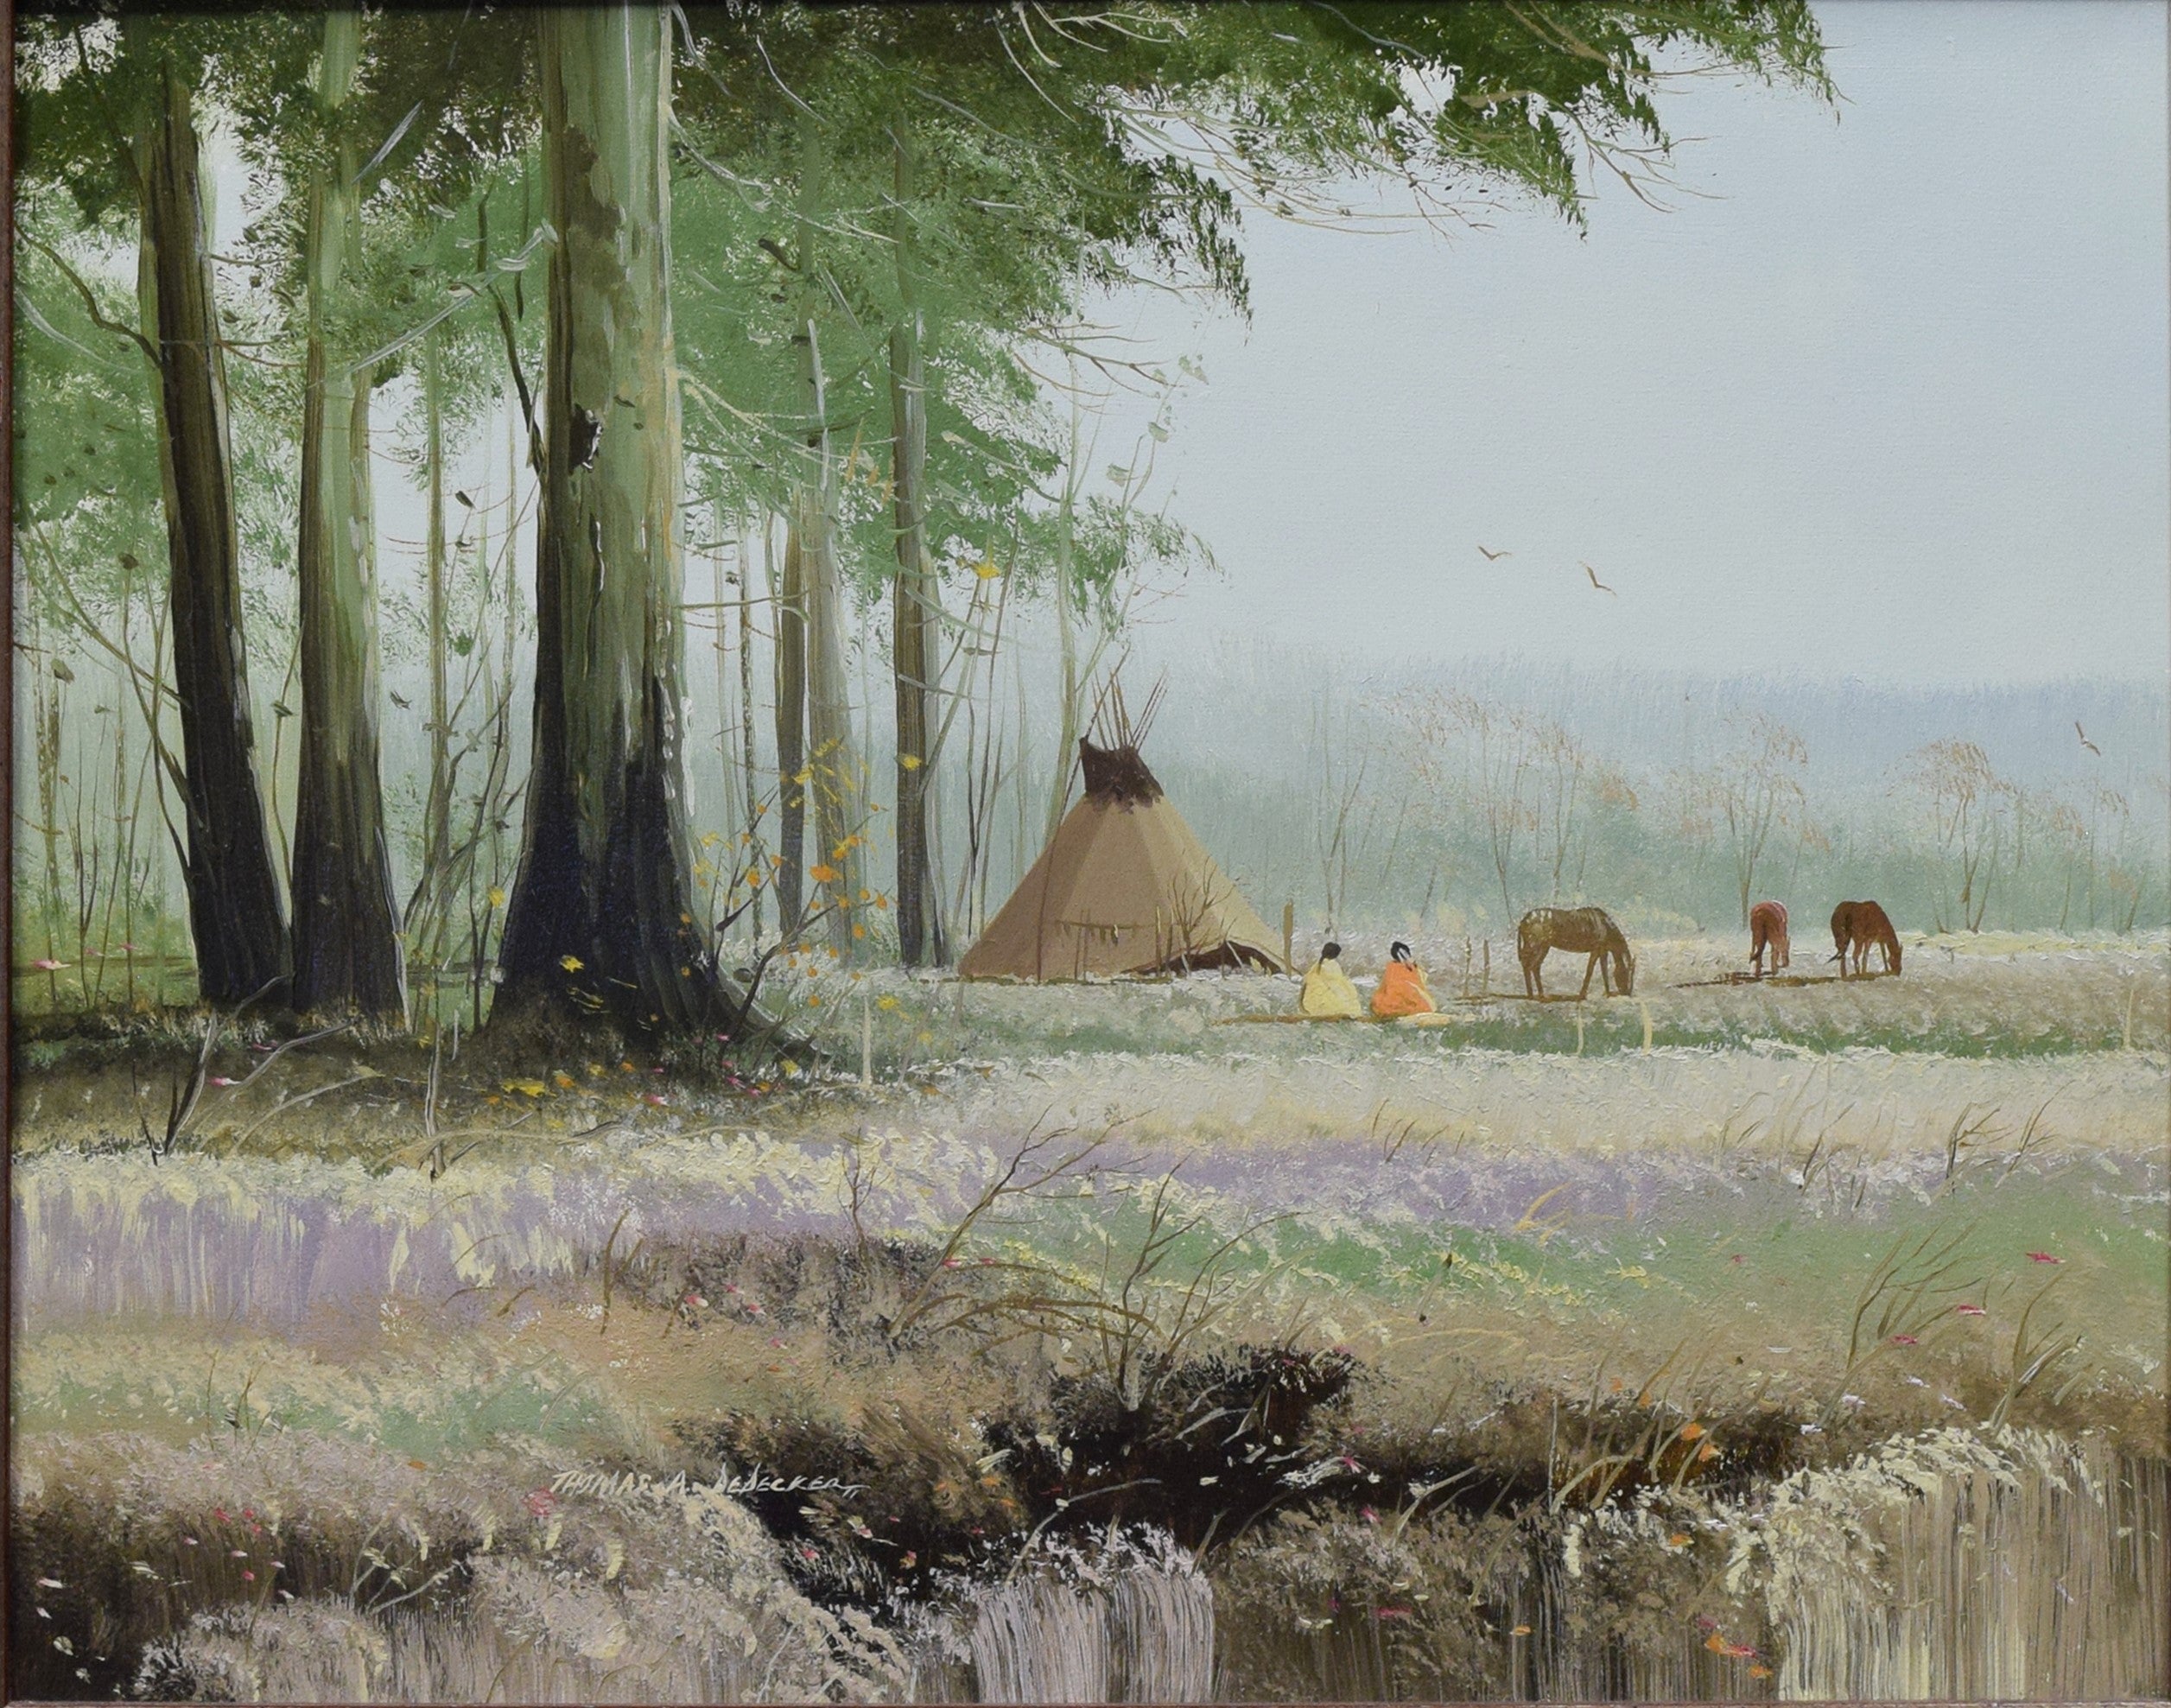 Spring Camp by Tomas deDecker, Fine Art, Painting, Native American